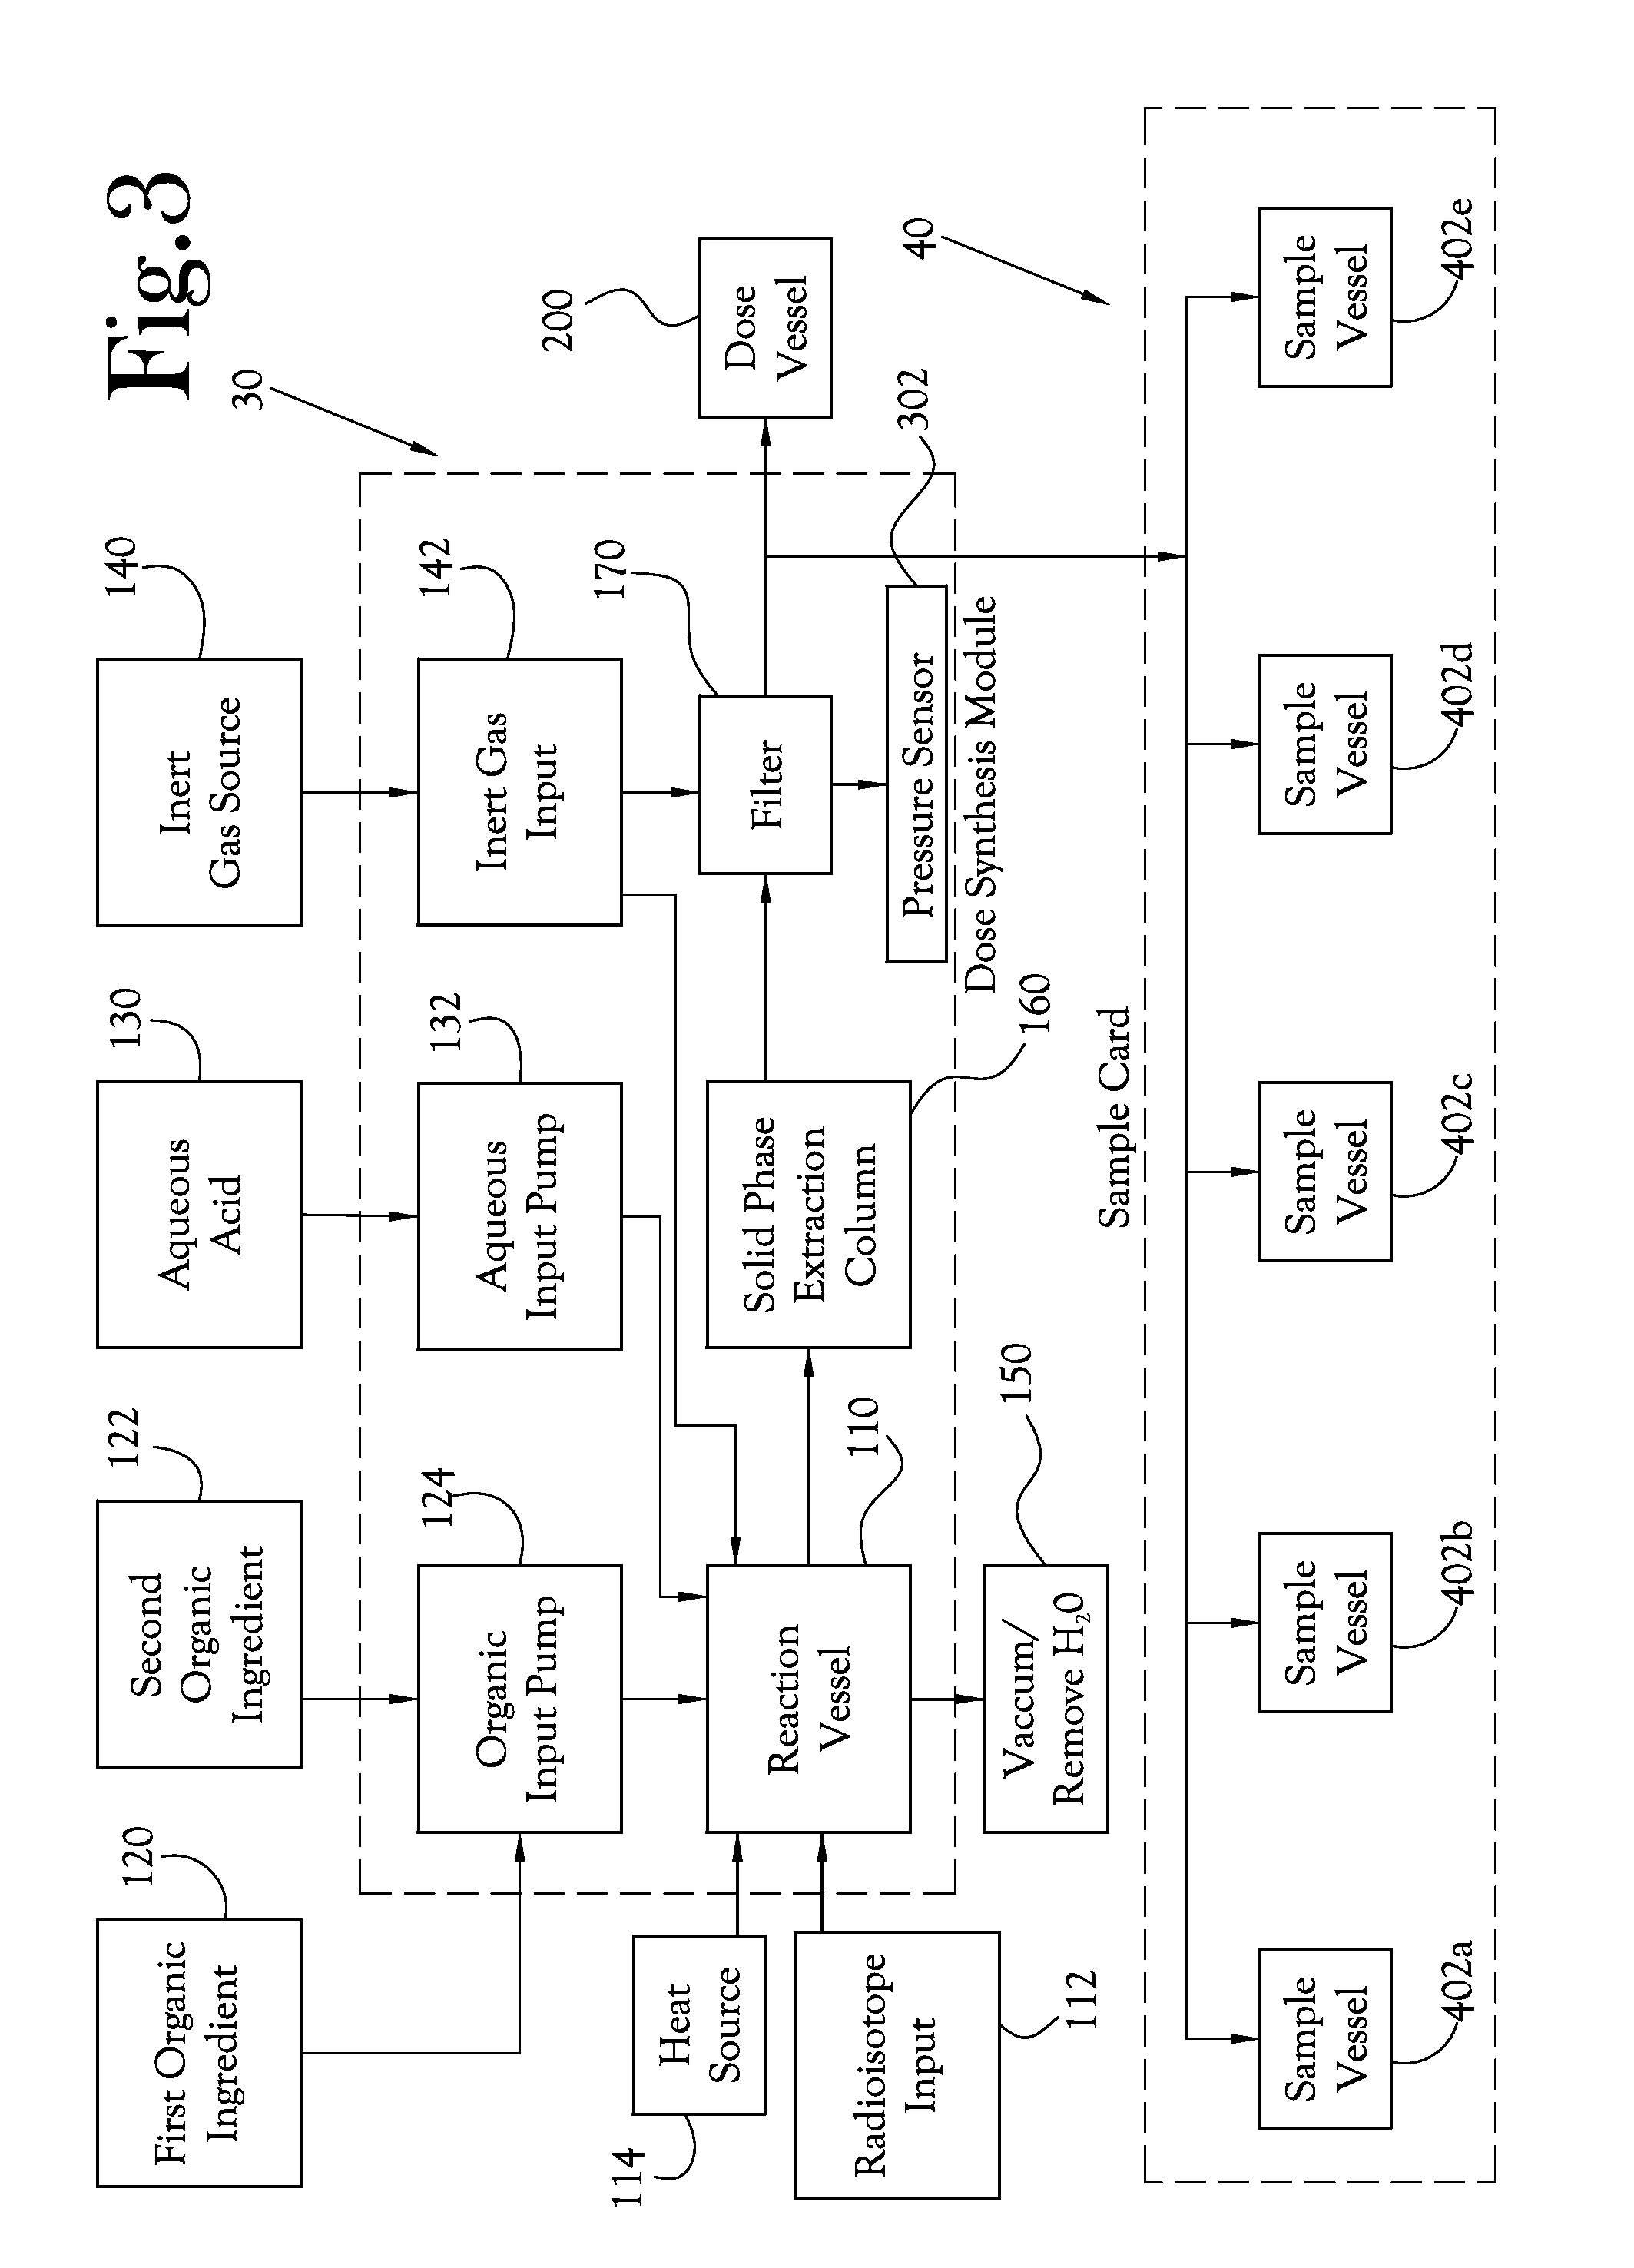 Dose Synthesis Card for Use with Automated Biomarker Production System